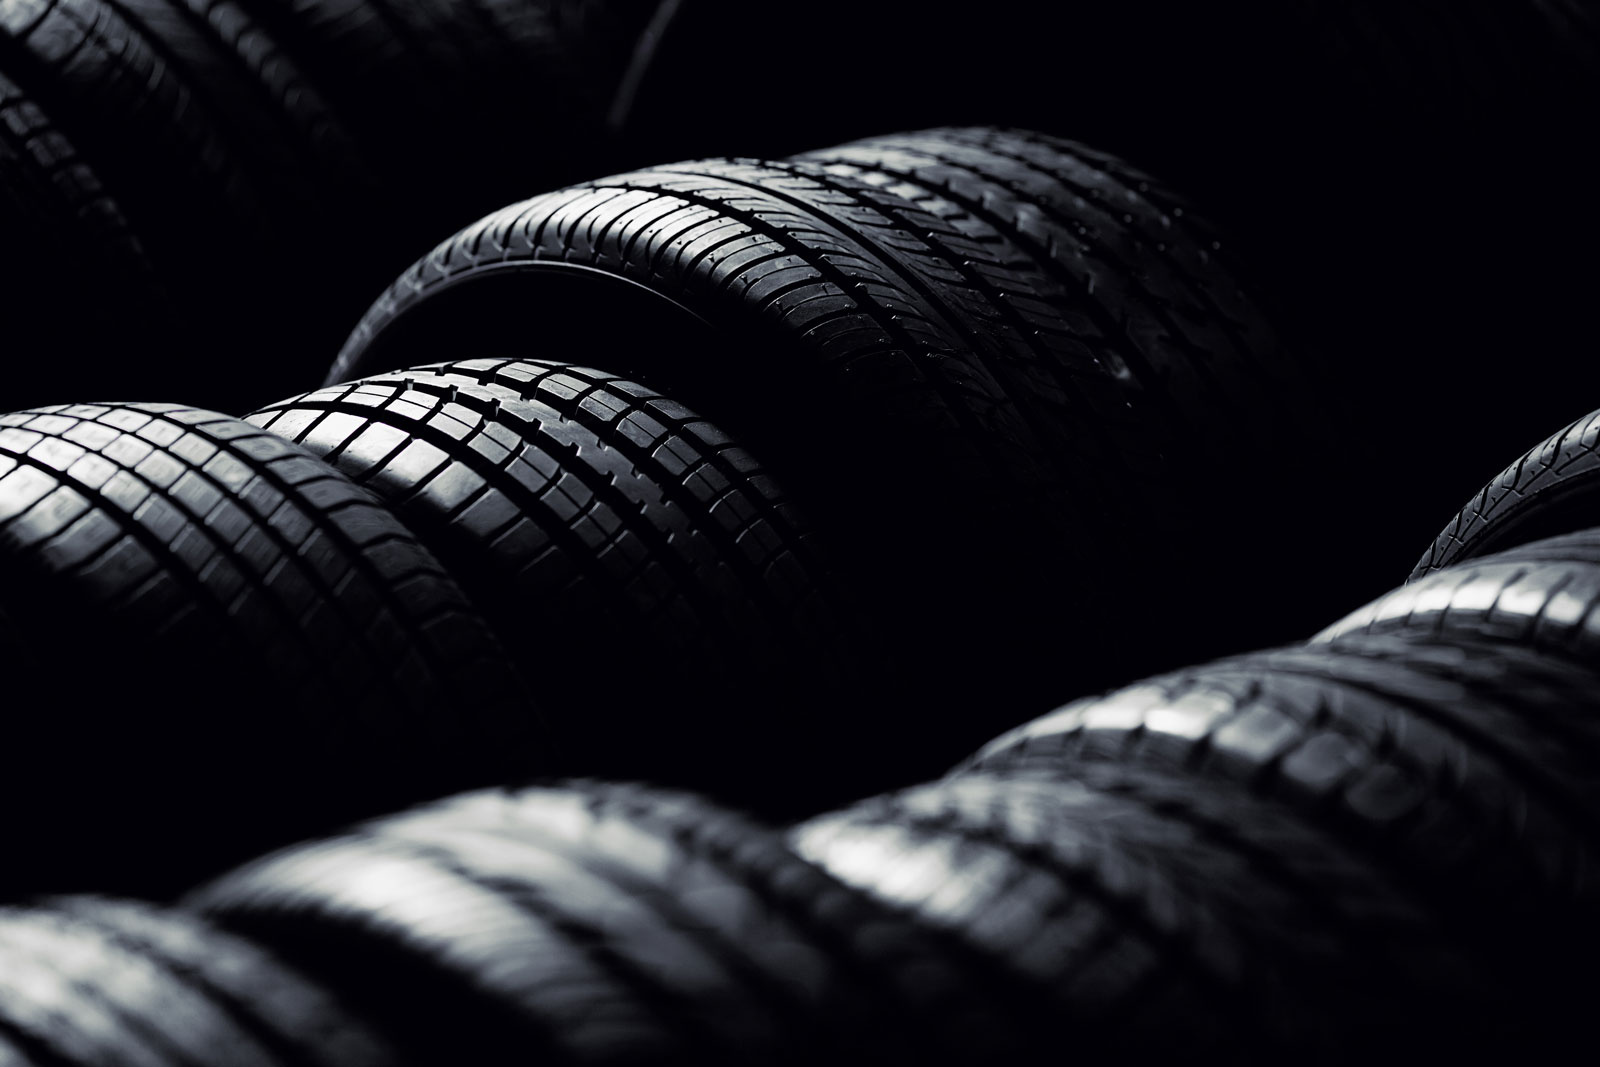 myers tire